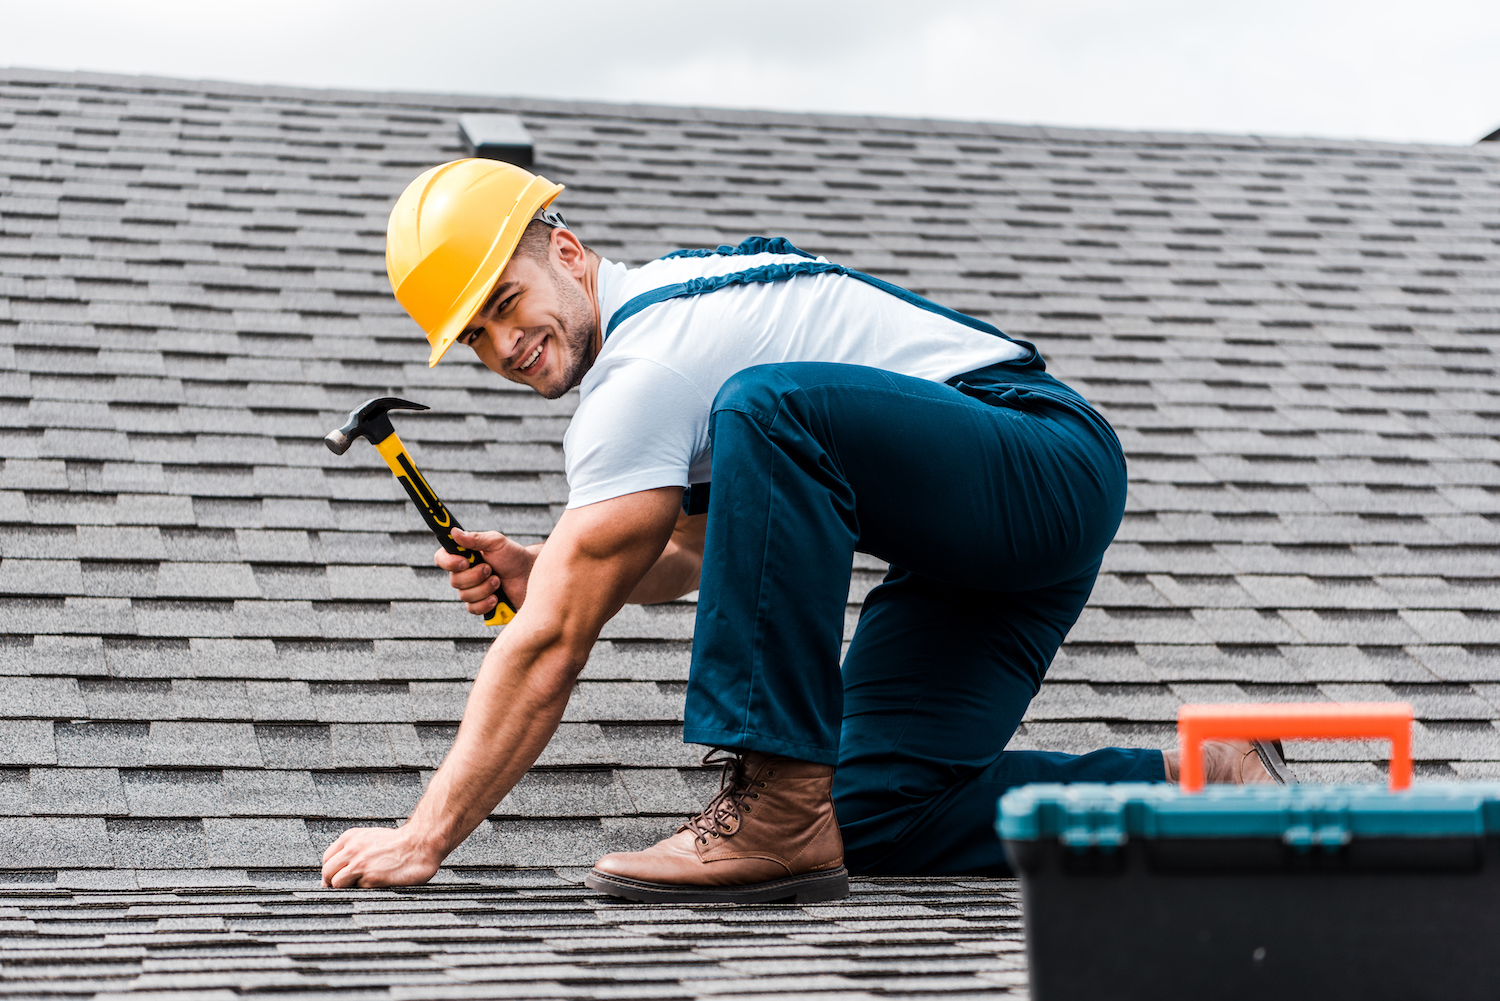 north jersey roofing